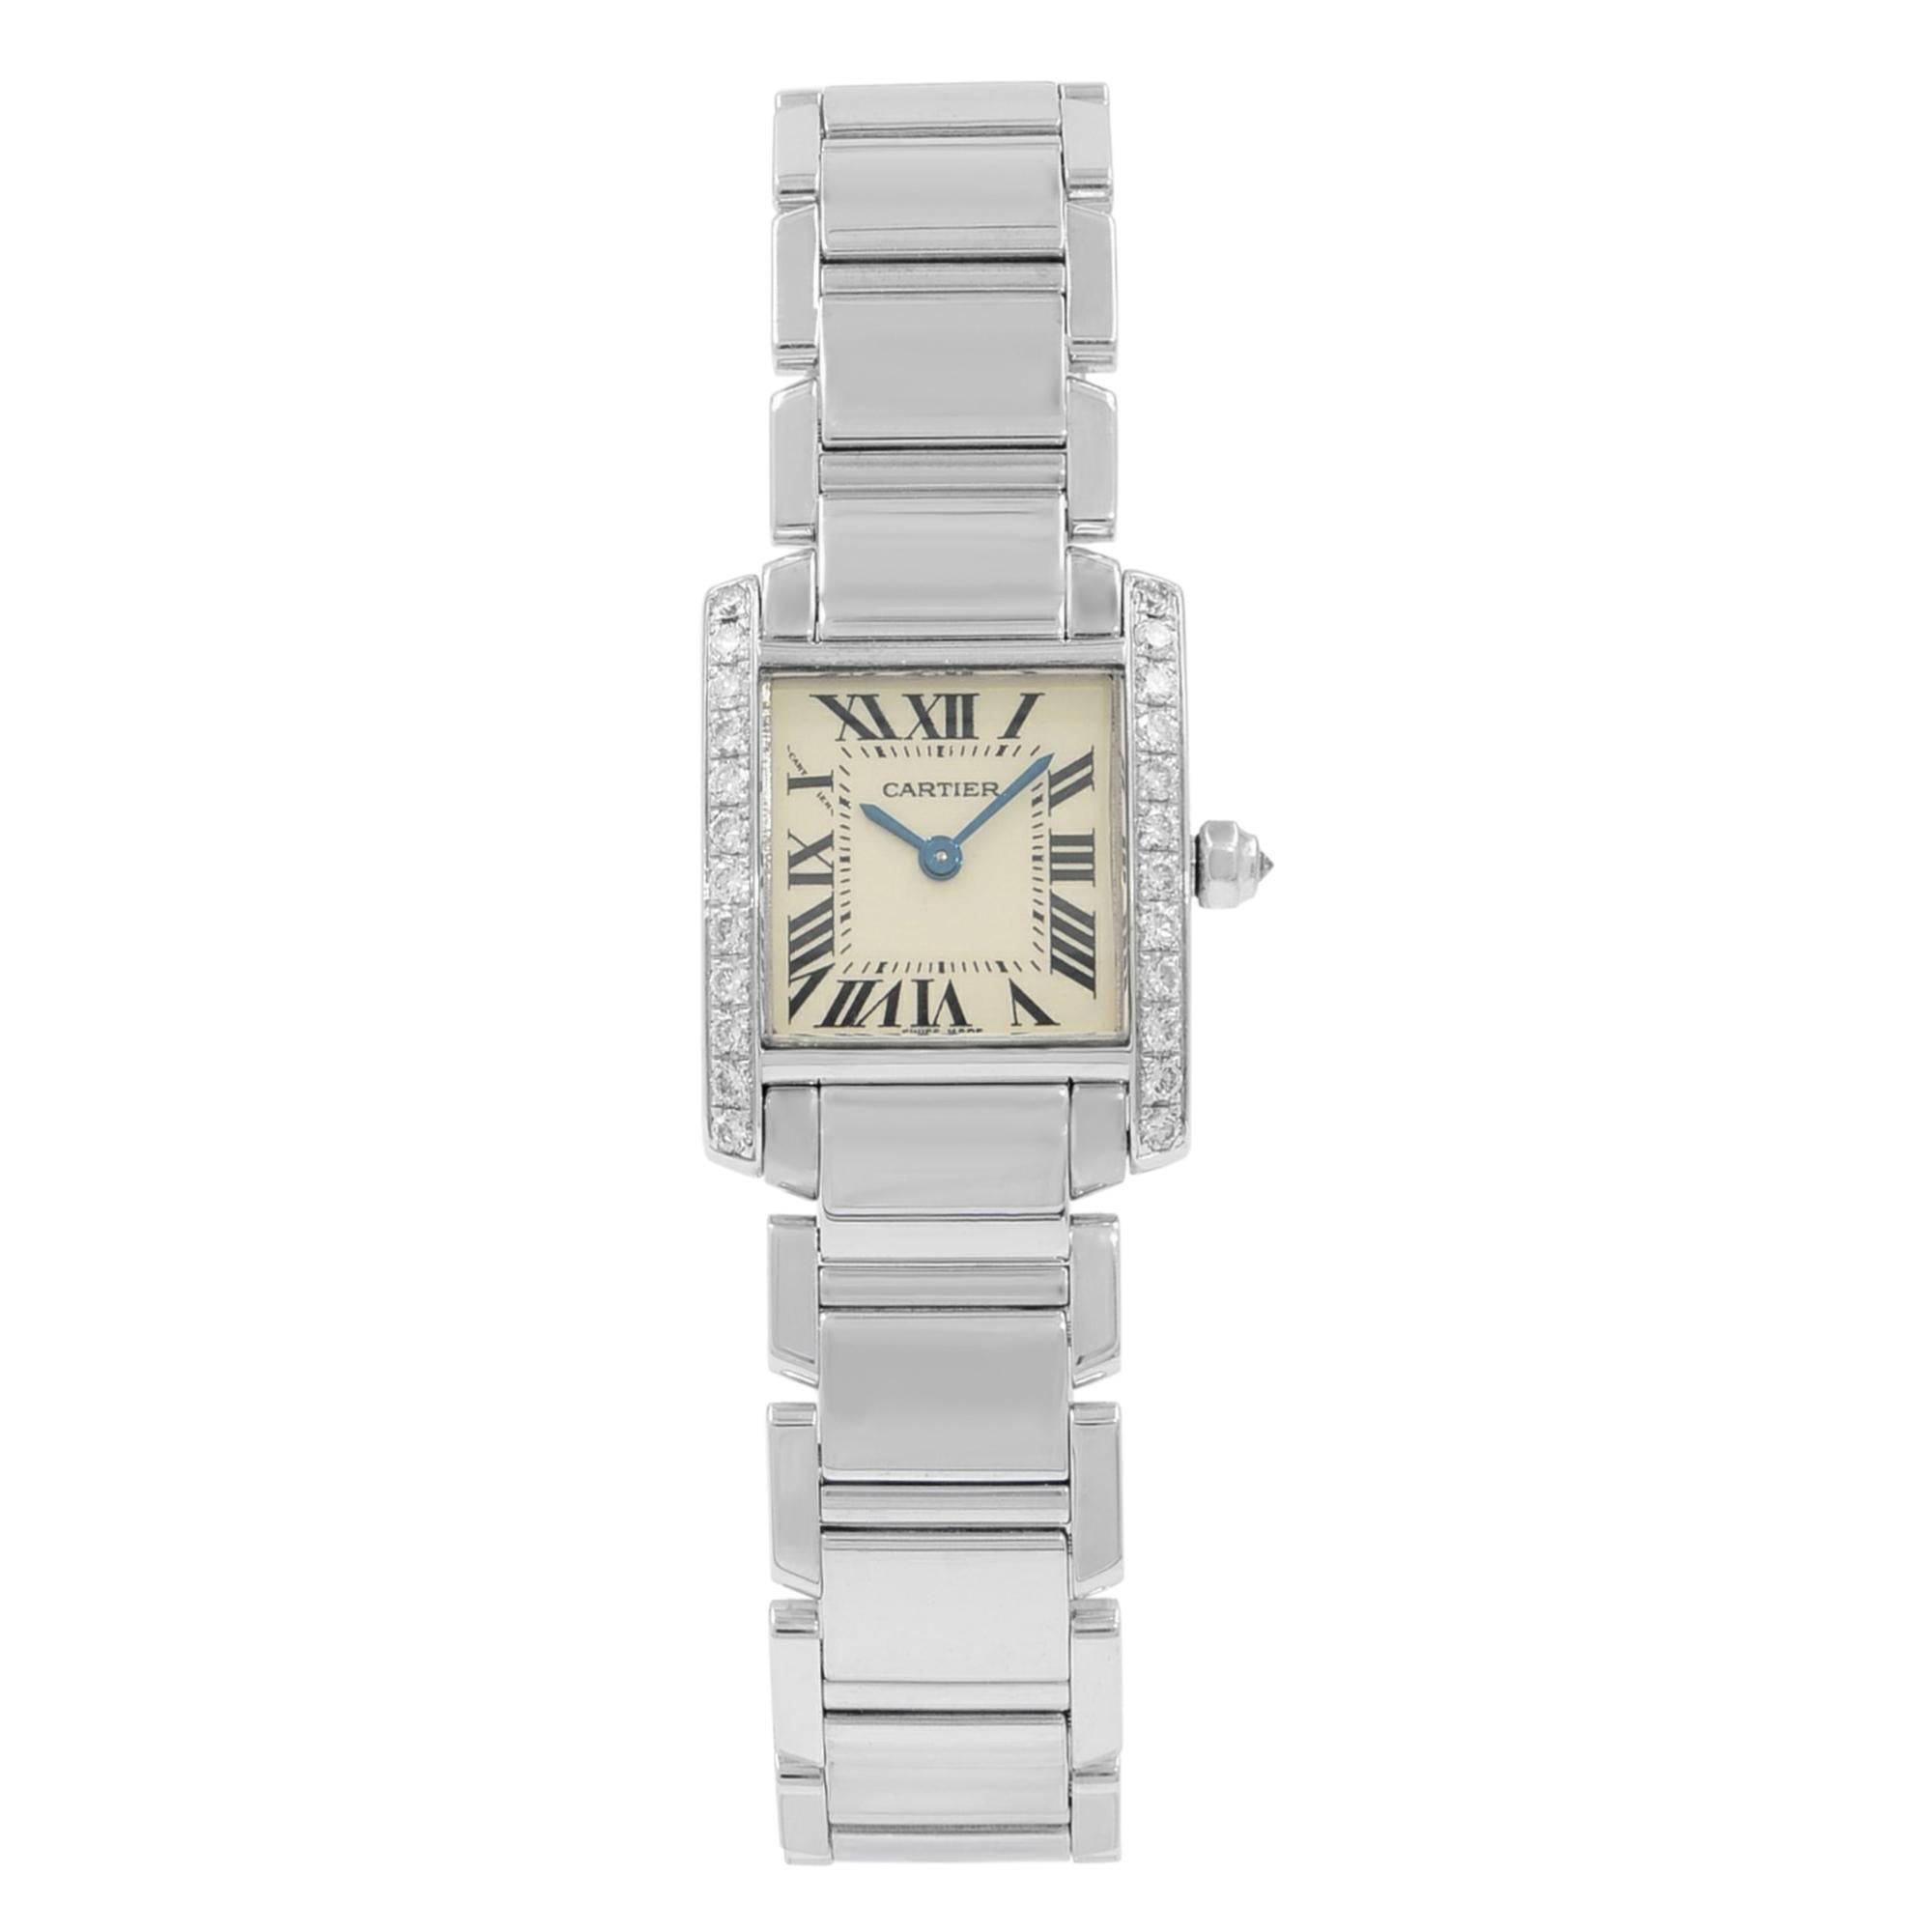 This pre-owned Cartier Tank  WE1002S3  is a beautiful Ladies timepiece that is powered by a quartz movement which is cased in an 18K white gold case. It has a round shape face,  dial, and has hand roman numerals style markers. It is completed with a